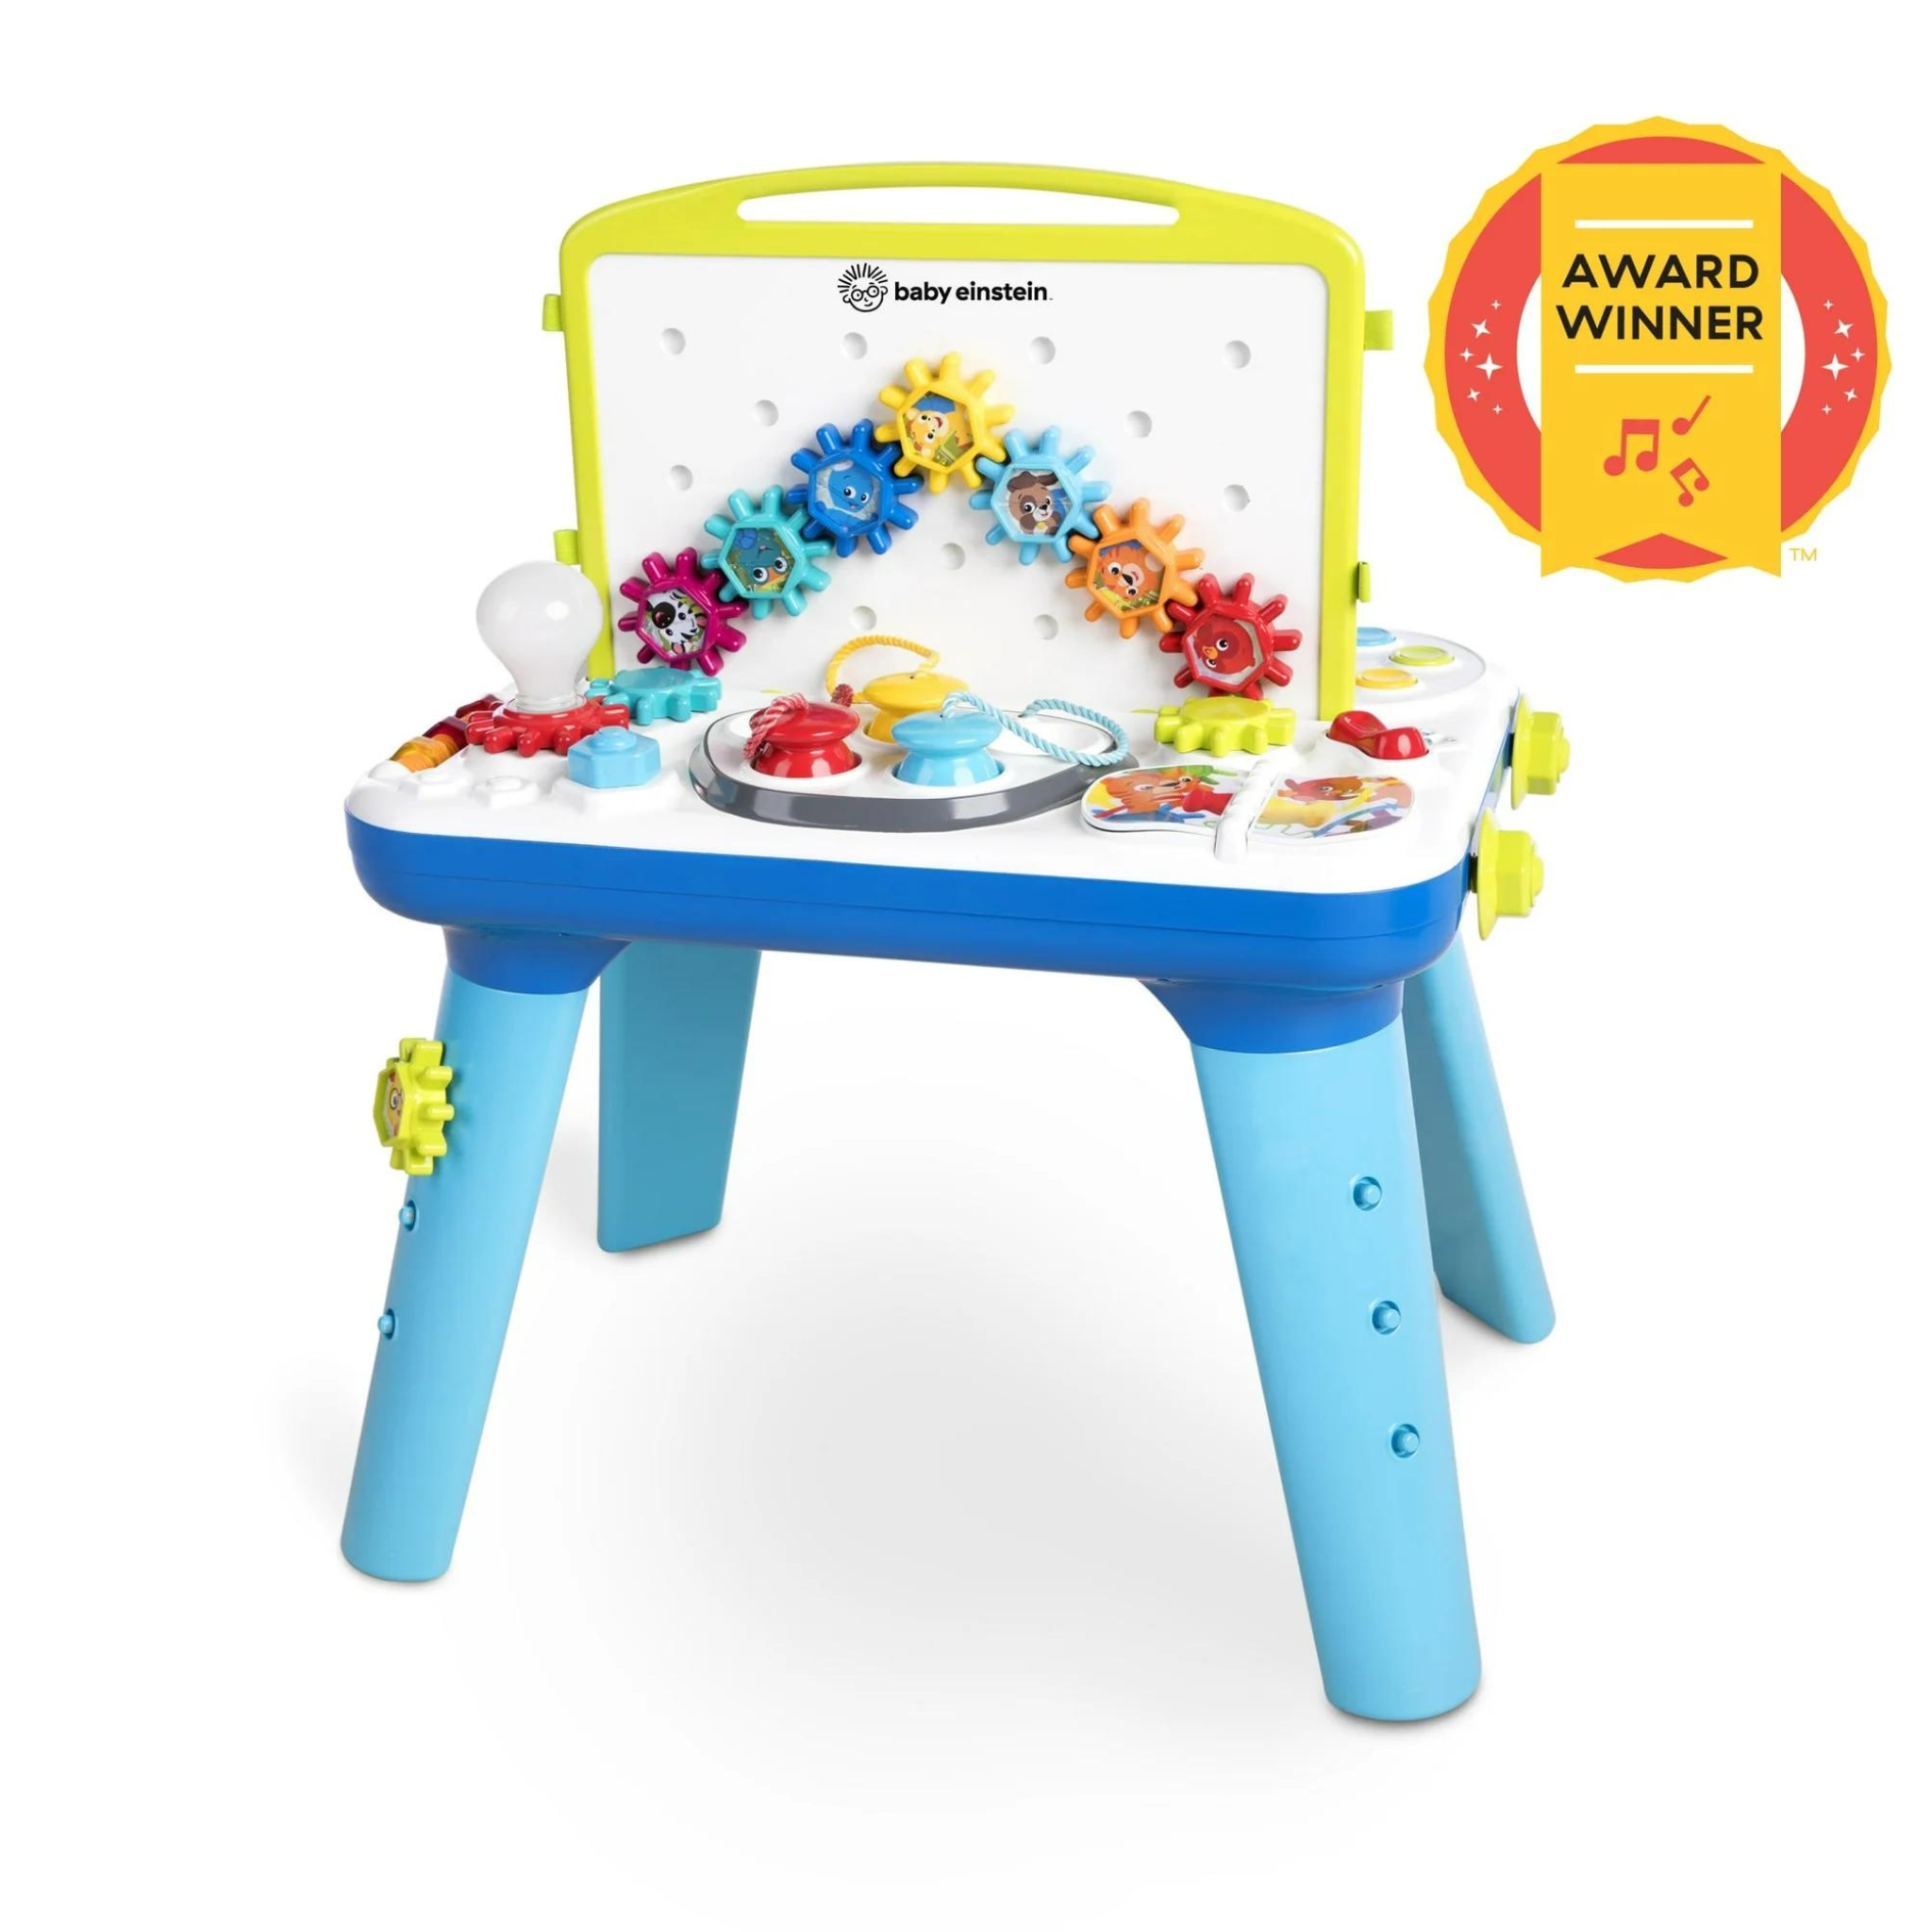 Baby Einstein Curiosity Table Activity Station Table Toddler Toy